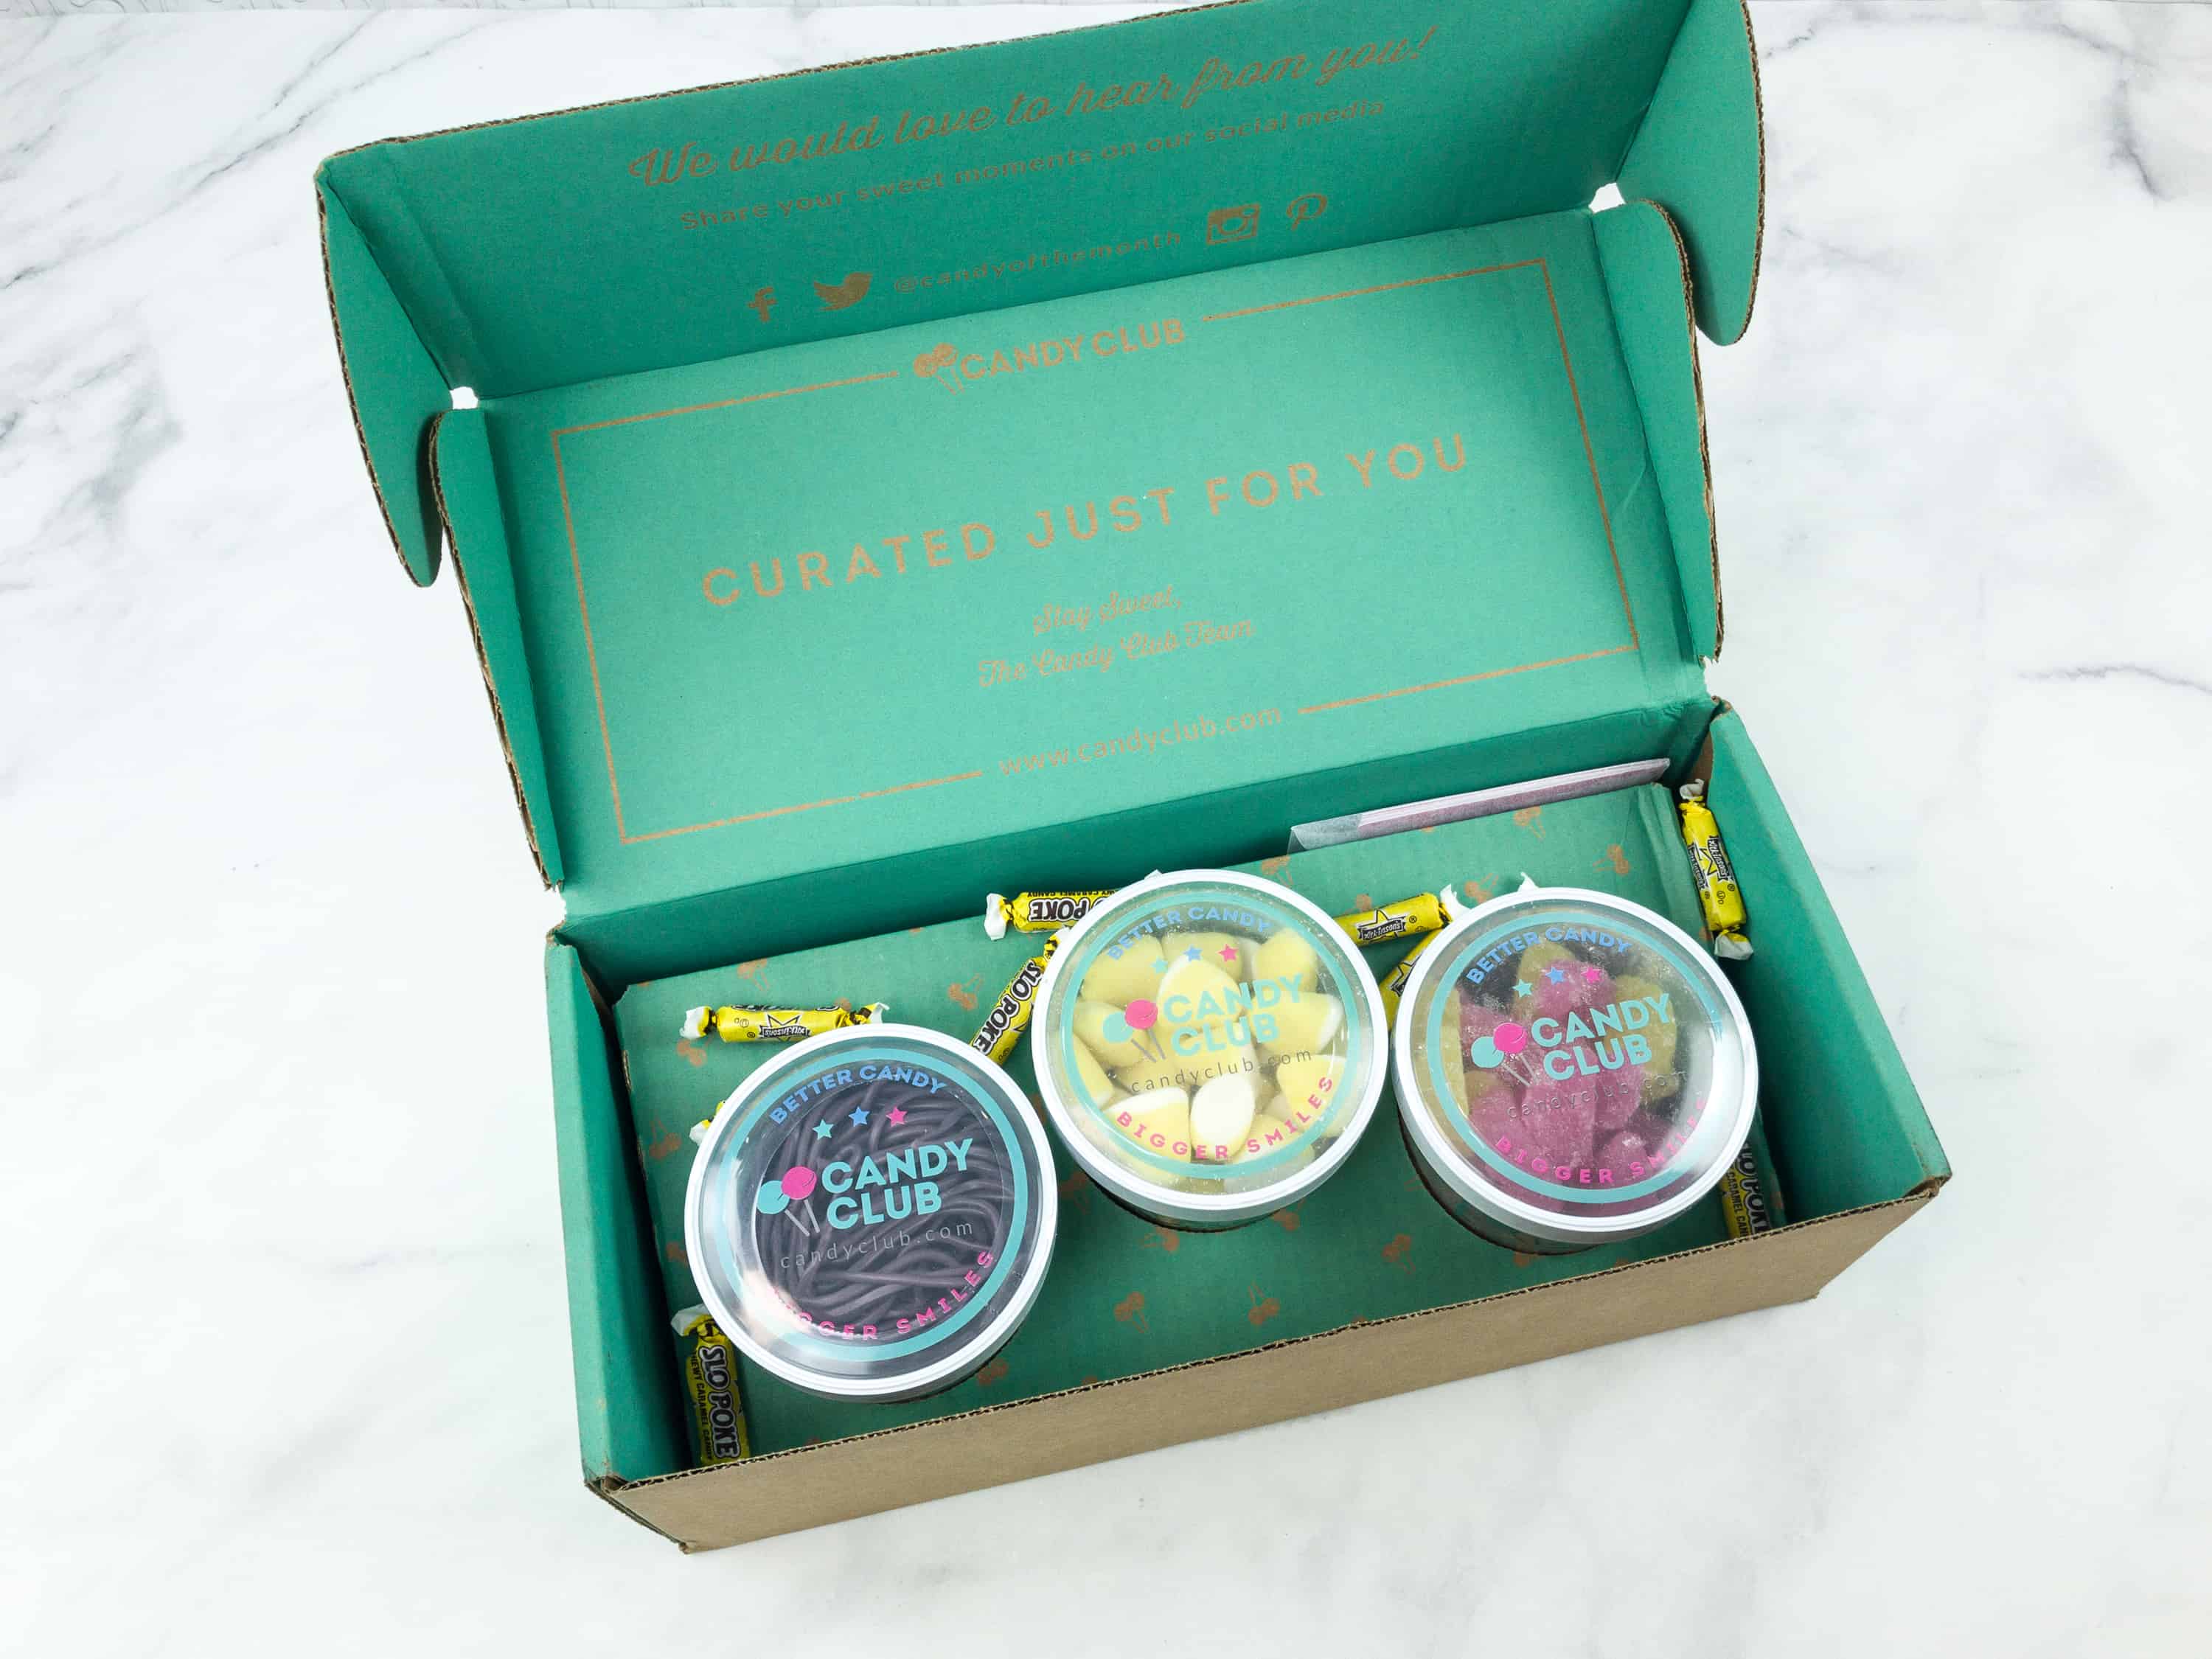 candy club subscription